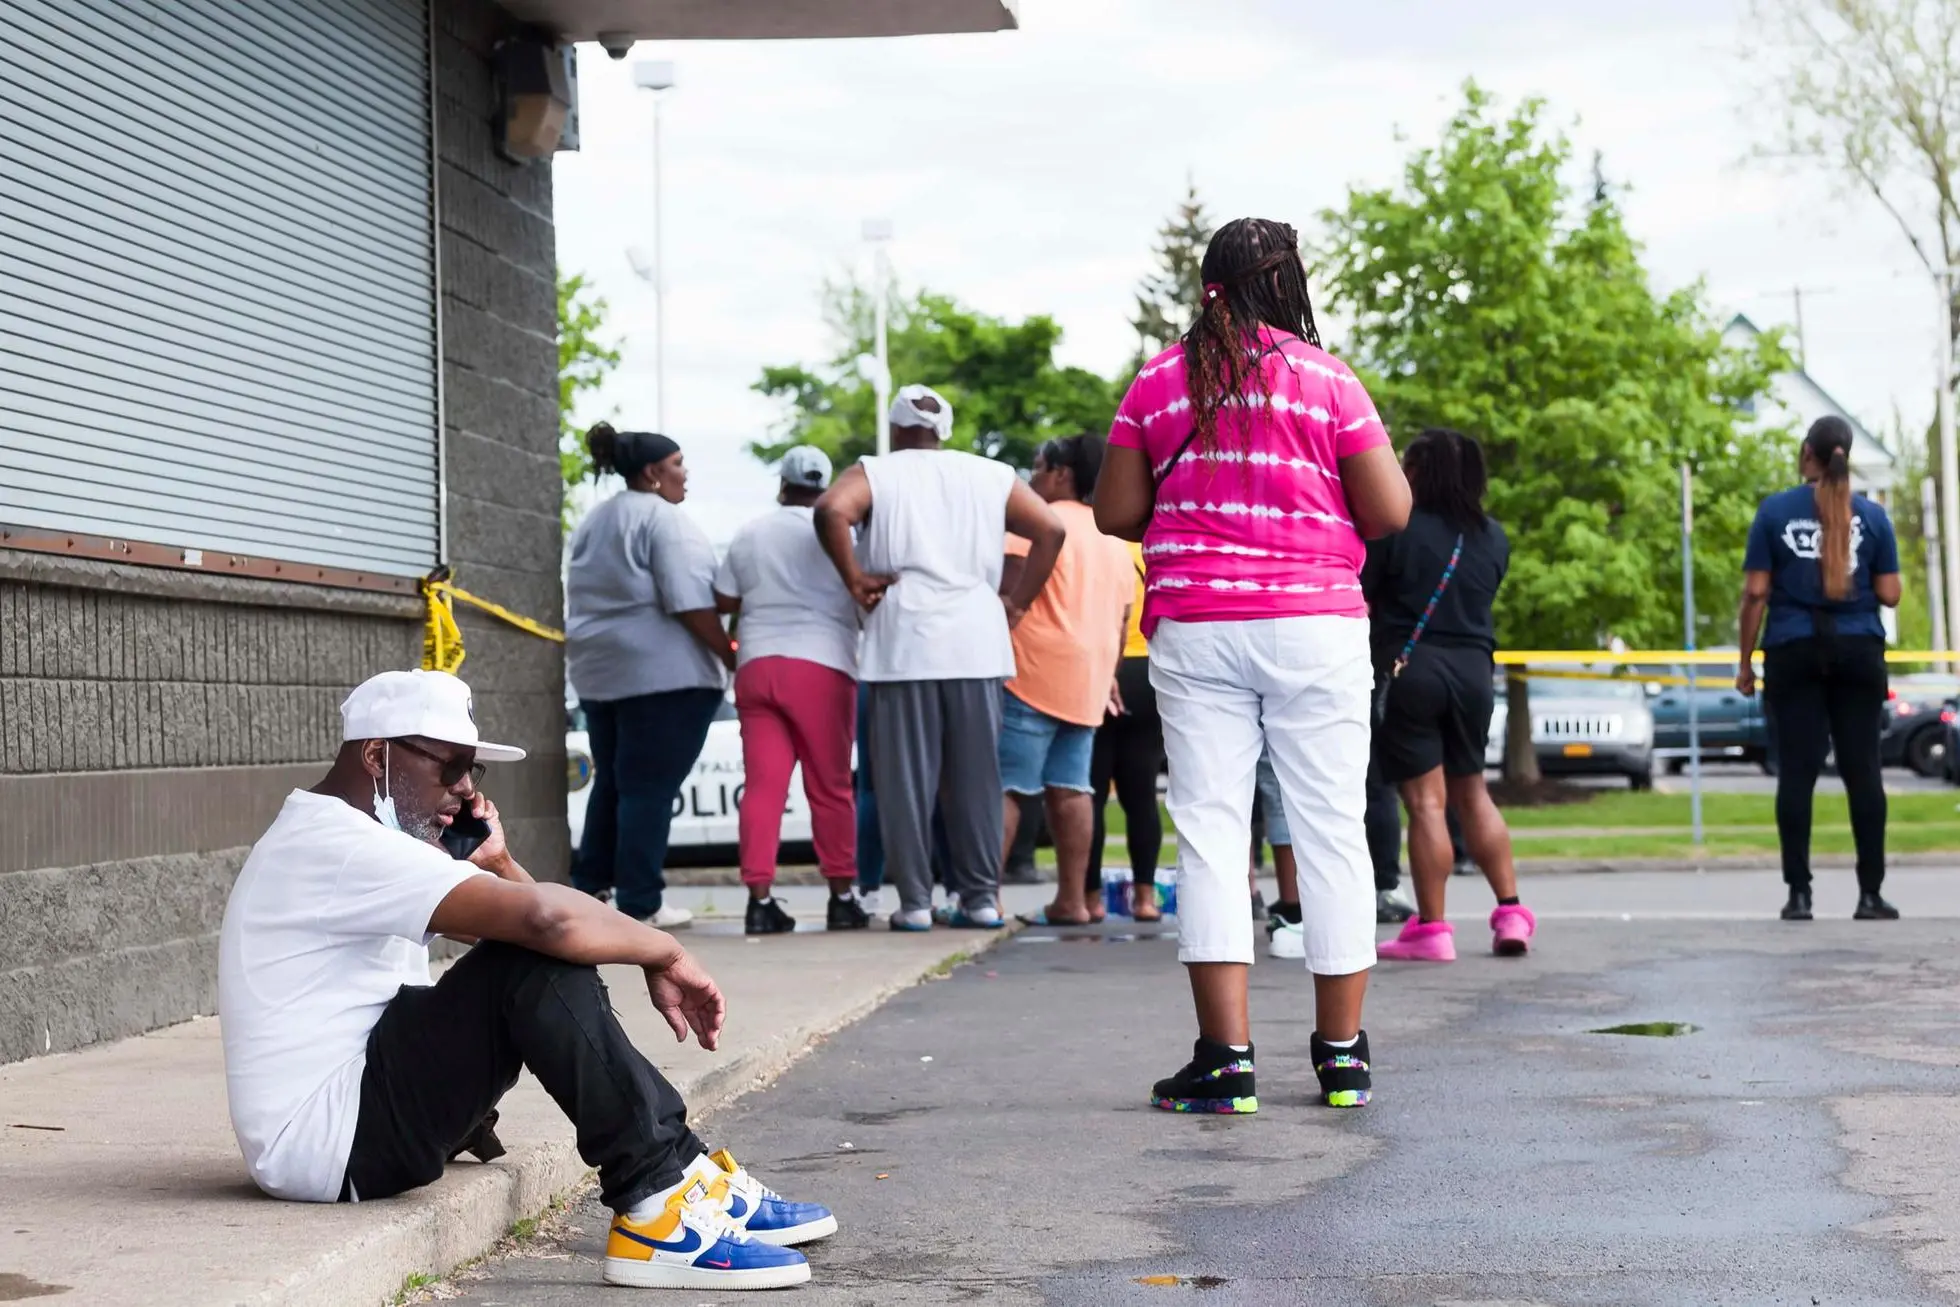 epa09947832 Community members gather near the scene of a mass shooting at the Tops Friendly Market grocery store in Buffalo, New York, USA, 14 May 2022. A gunman, who has been taken into custody by police, reportedly opened fire at the market killing as many as 10 people. EPA/BRANDON WATSON